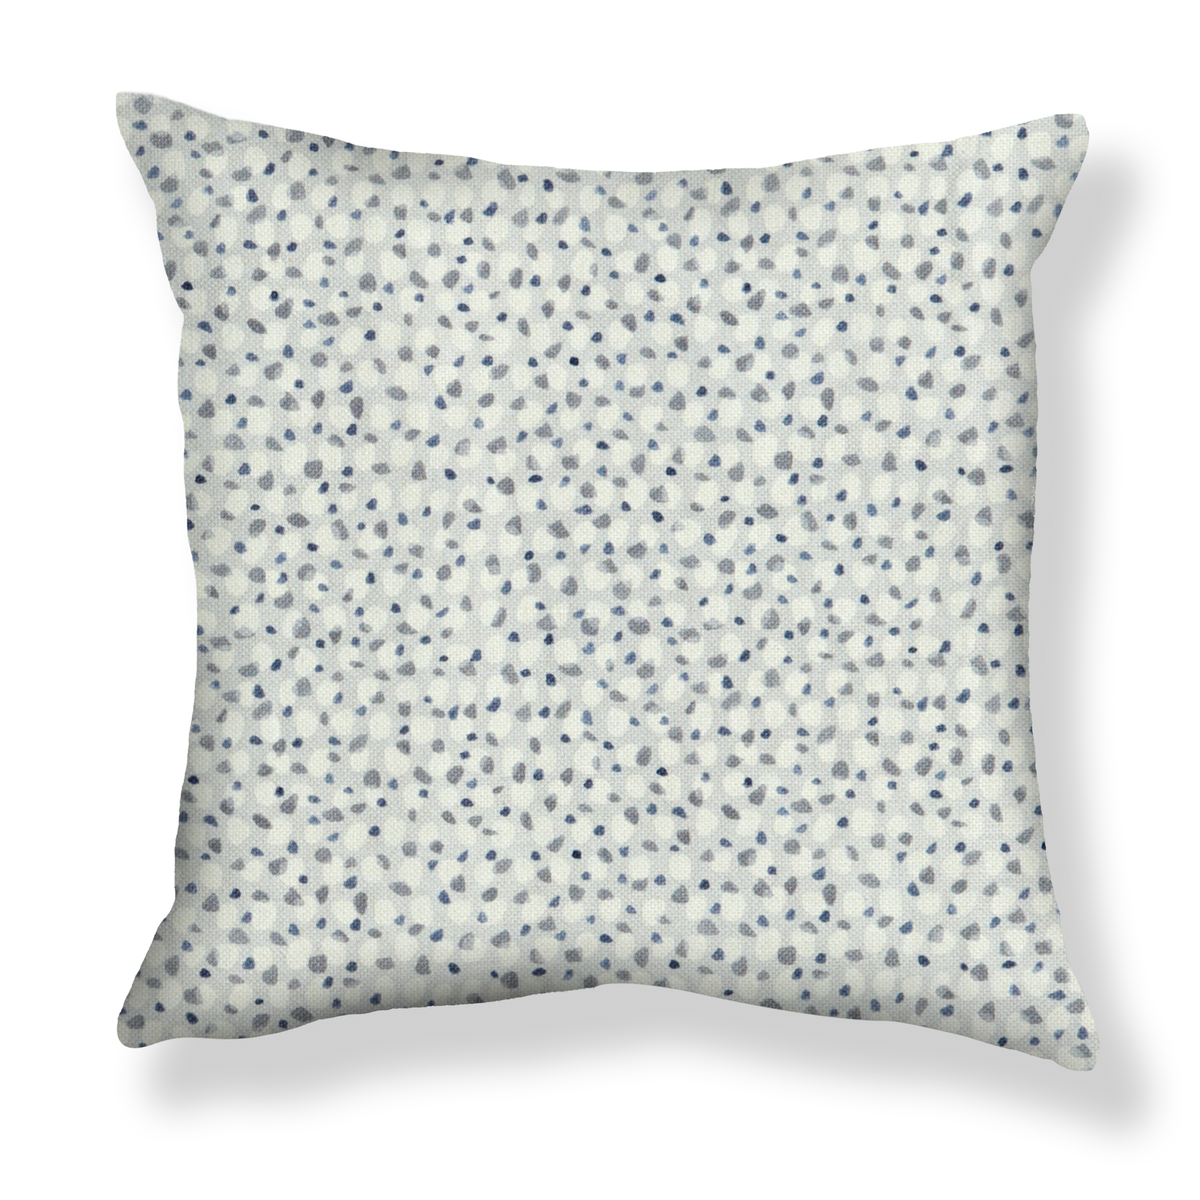 Scattered Dot Pillow in Gray-Blue